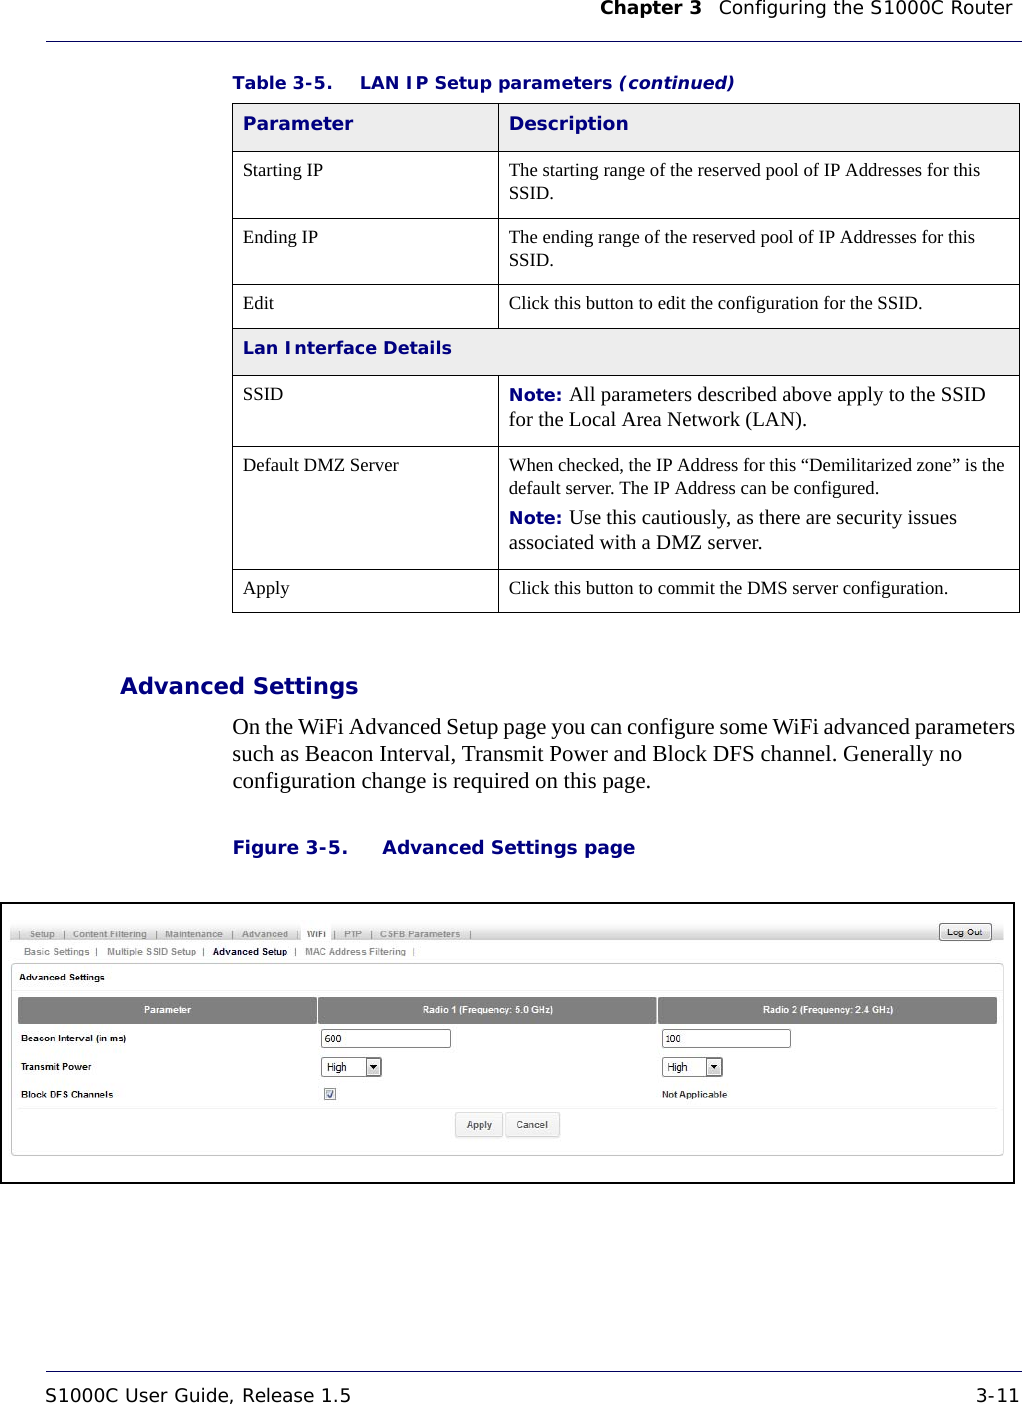 Chapter 3    Configuring the S1000C Router S1000C User Guide, Release 1.5 3-11DRAFTAdvanced SettingsOn the WiFi Advanced Setup page you can configure some WiFi advanced parameters such as Beacon Interval, Transmit Power and Block DFS channel. Generally no configuration change is required on this page. Figure 3-5. Advanced Settings pageStarting IP The starting range of the reserved pool of IP Addresses for this SSID.Ending IP The ending range of the reserved pool of IP Addresses for this SSID.Edit Click this button to edit the configuration for the SSID.Lan Interface DetailsSSID Note: All parameters described above apply to the SSID for the Local Area Network (LAN).Default DMZ Server When checked, the IP Address for this “Demilitarized zone” is the default server. The IP Address can be configured.Note: Use this cautiously, as there are security issues associated with a DMZ server.Apply Click this button to commit the DMS server configuration.Table 3-5. LAN IP Setup parameters (continued)Parameter Description